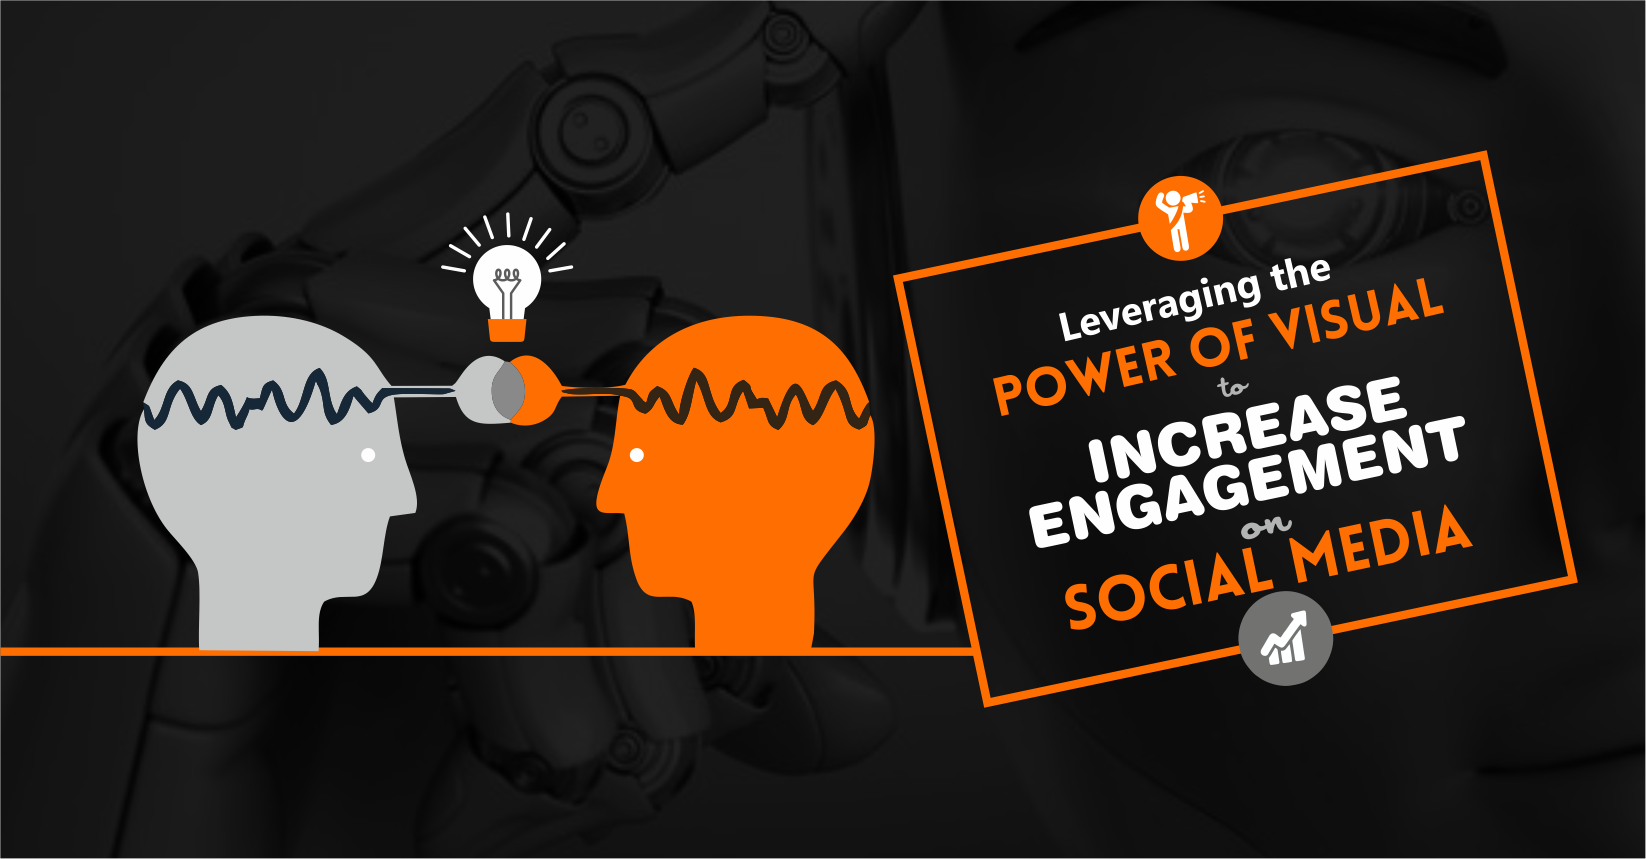 Leveraging the power of visual to increase engagement on Social Media